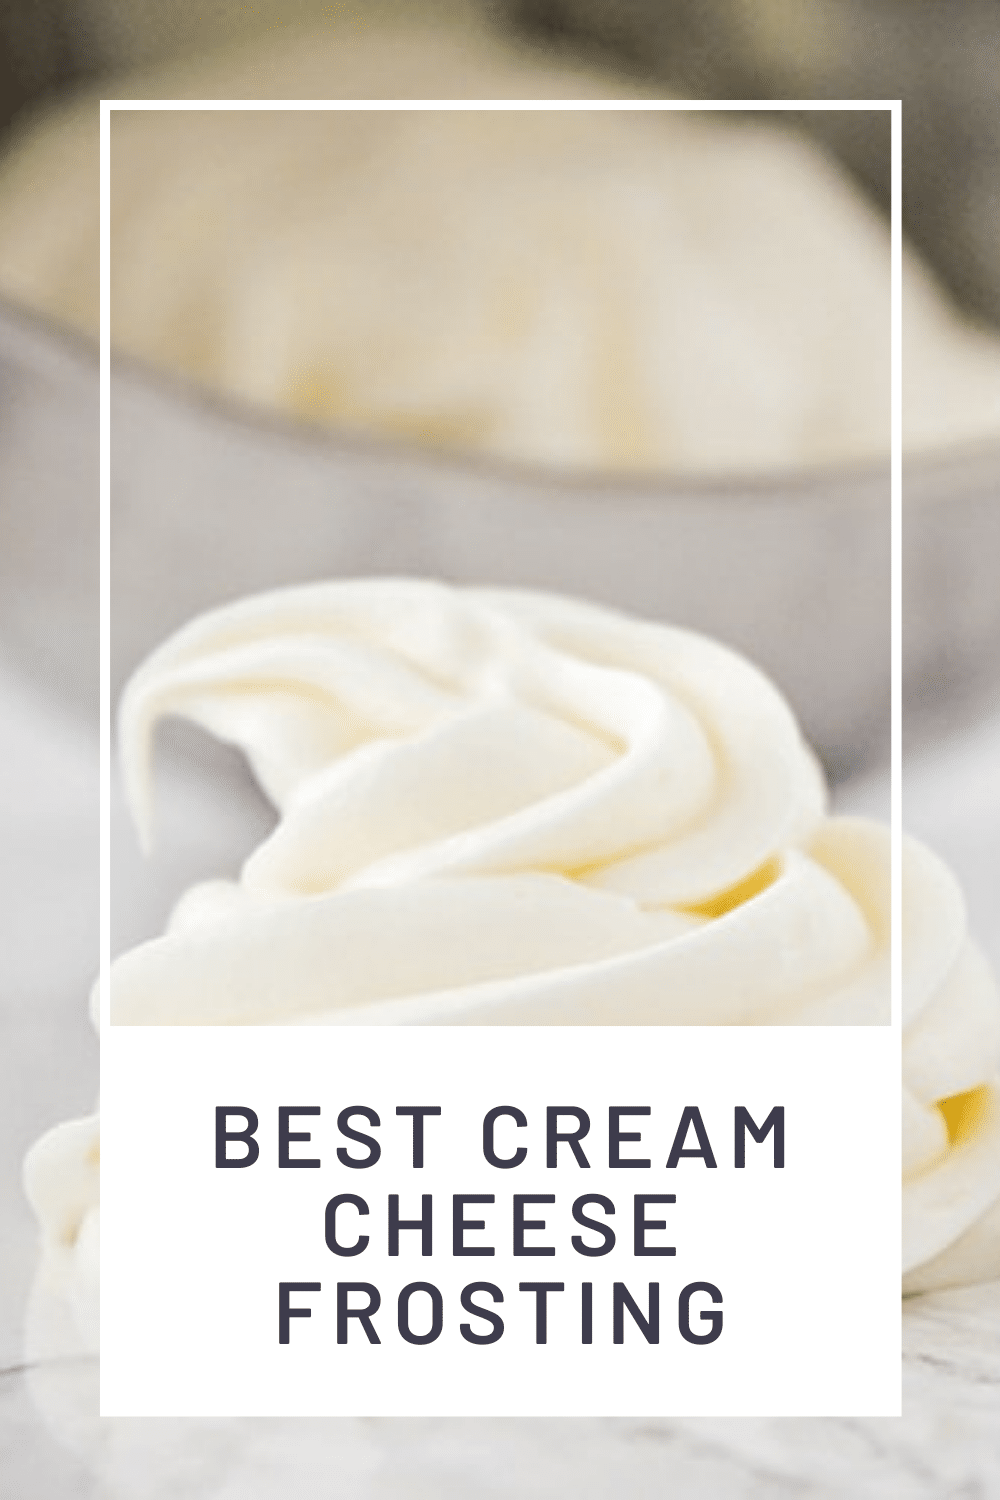 If heaven had a flavor, this would be it! This is the best cream cheese frosting recipe that is so good I'll bet it's the best you've ever had! Add it to the top of your favorite cookies and cupcakes, or whip up a batch and dive in with a spoon! This frosting recipe is perfect all year long but is especially perfect for all of your holiday baking needs! via @somewhatsimple